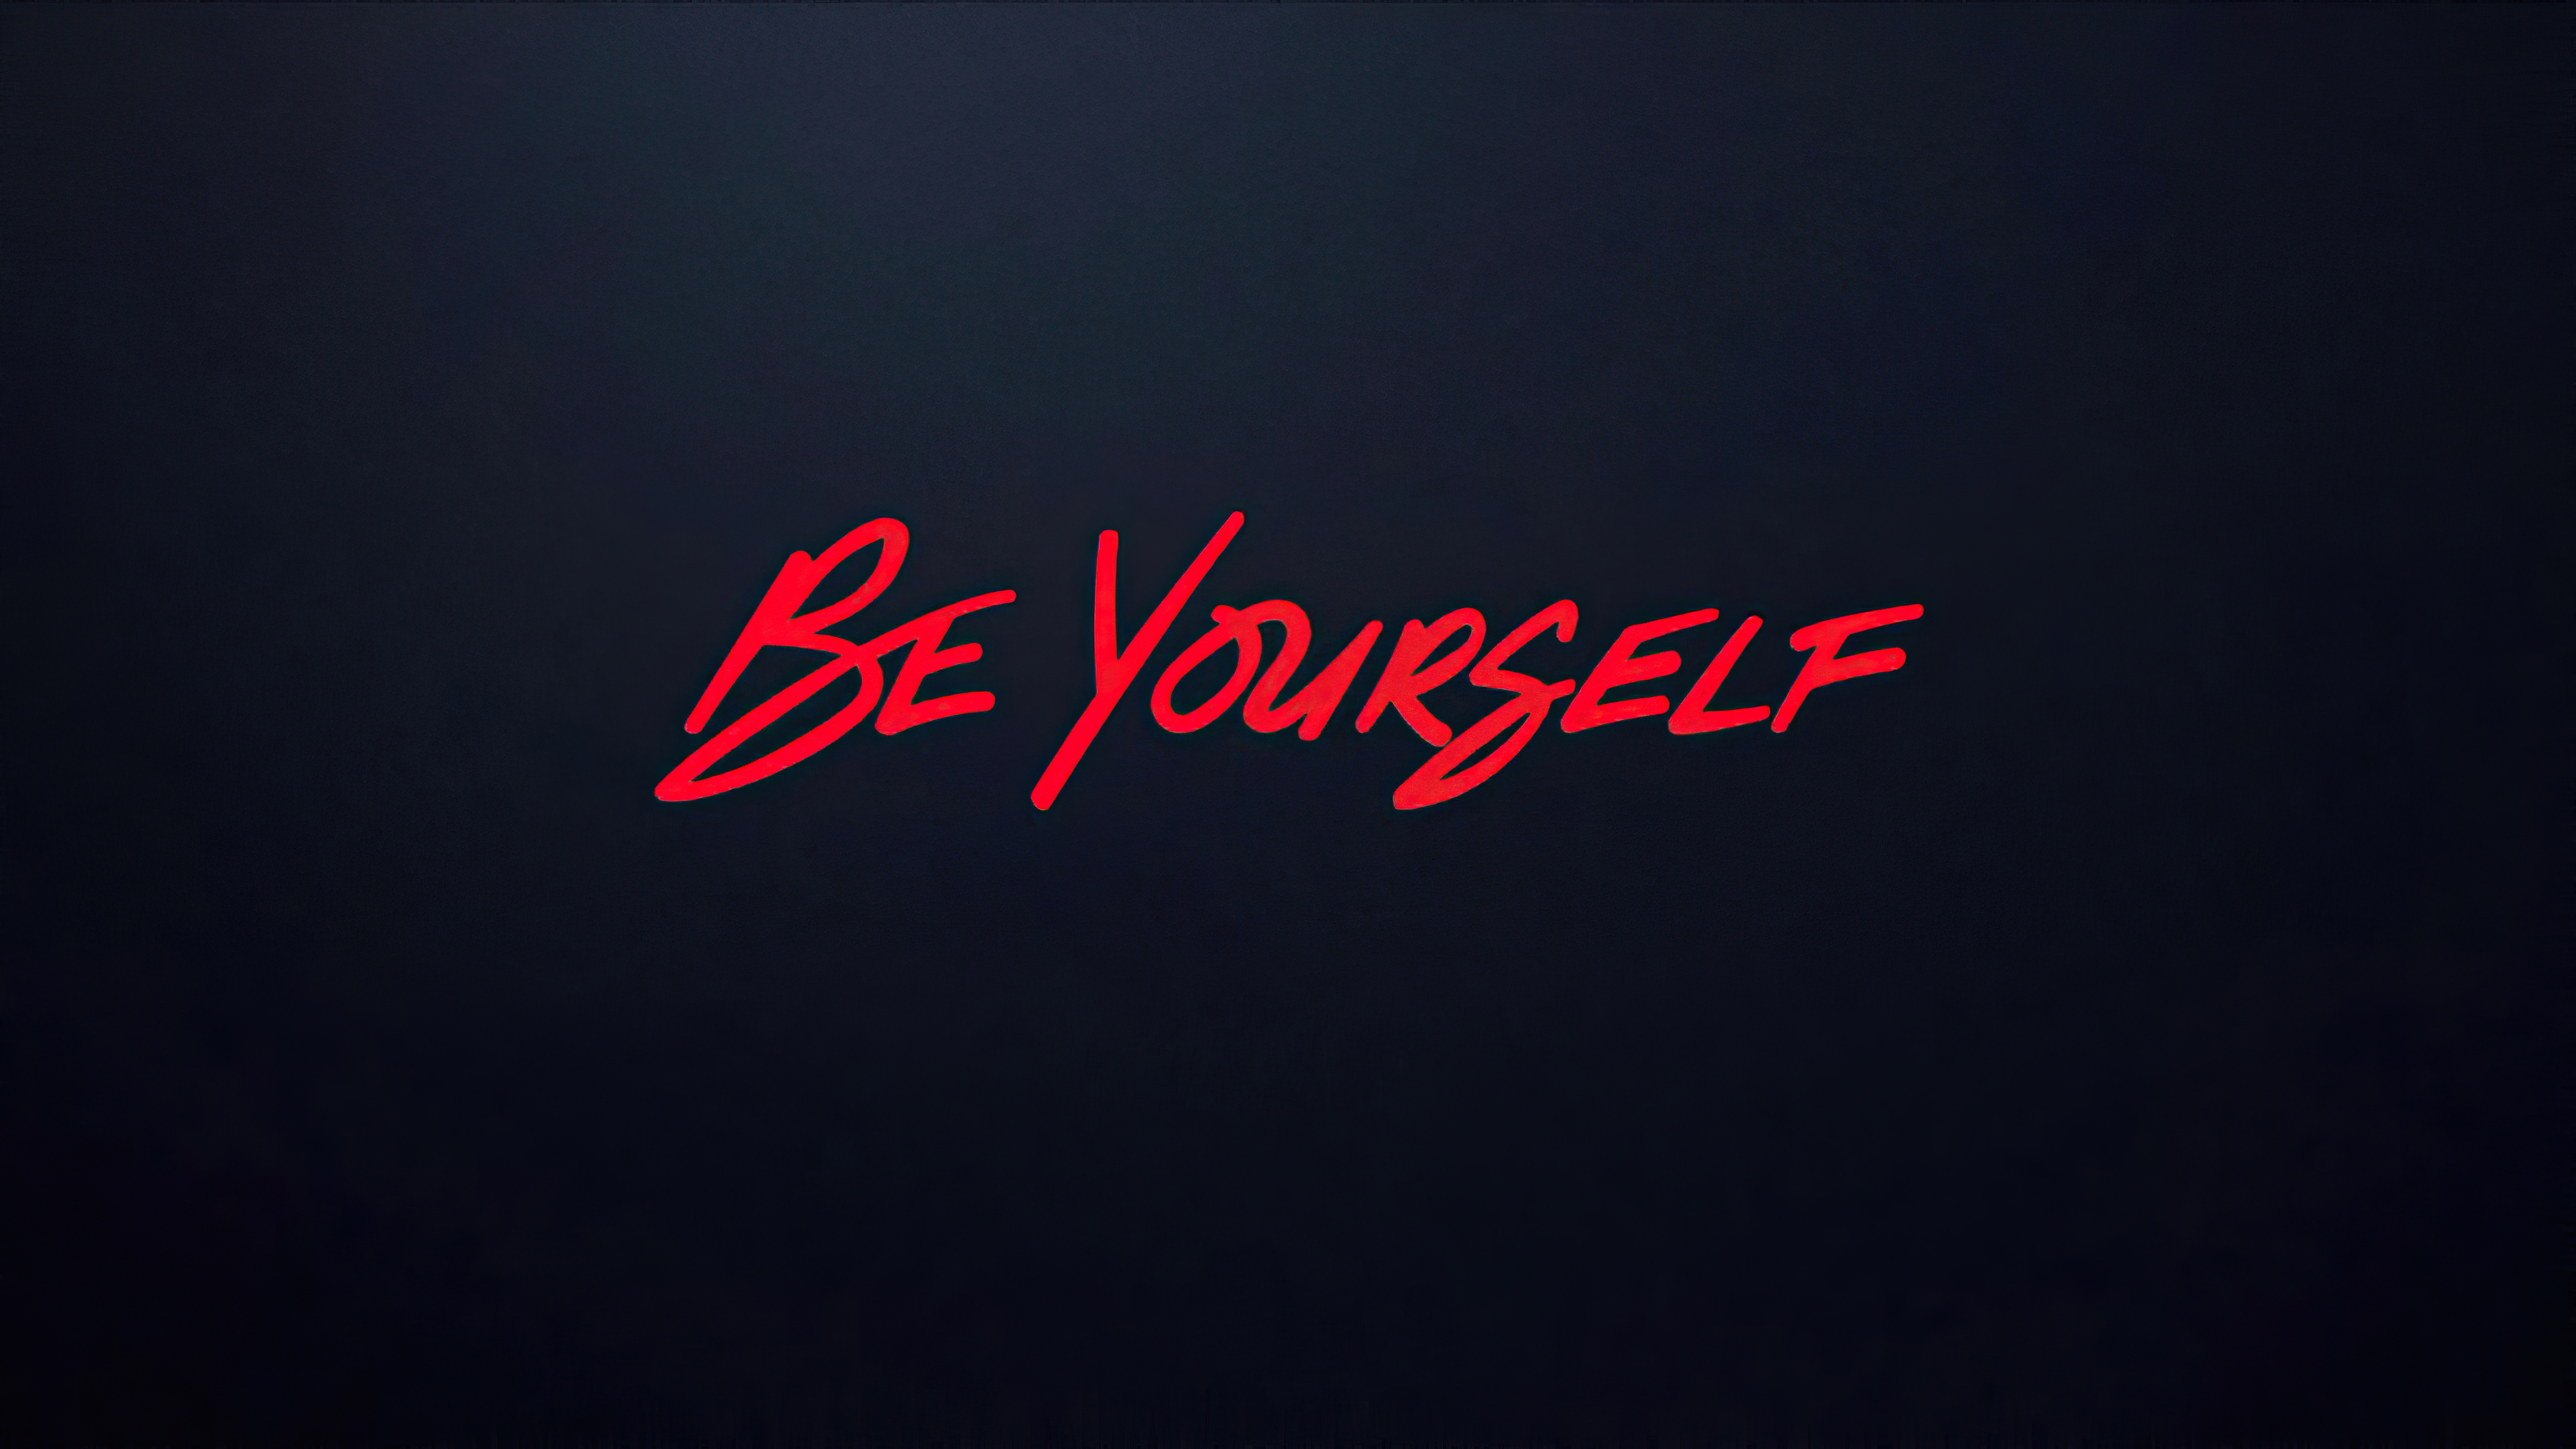 HD wallpaper, Dark Background, Be You, Typography, 5K, Be Yourself, Inspirational Quotes, Miles Morales